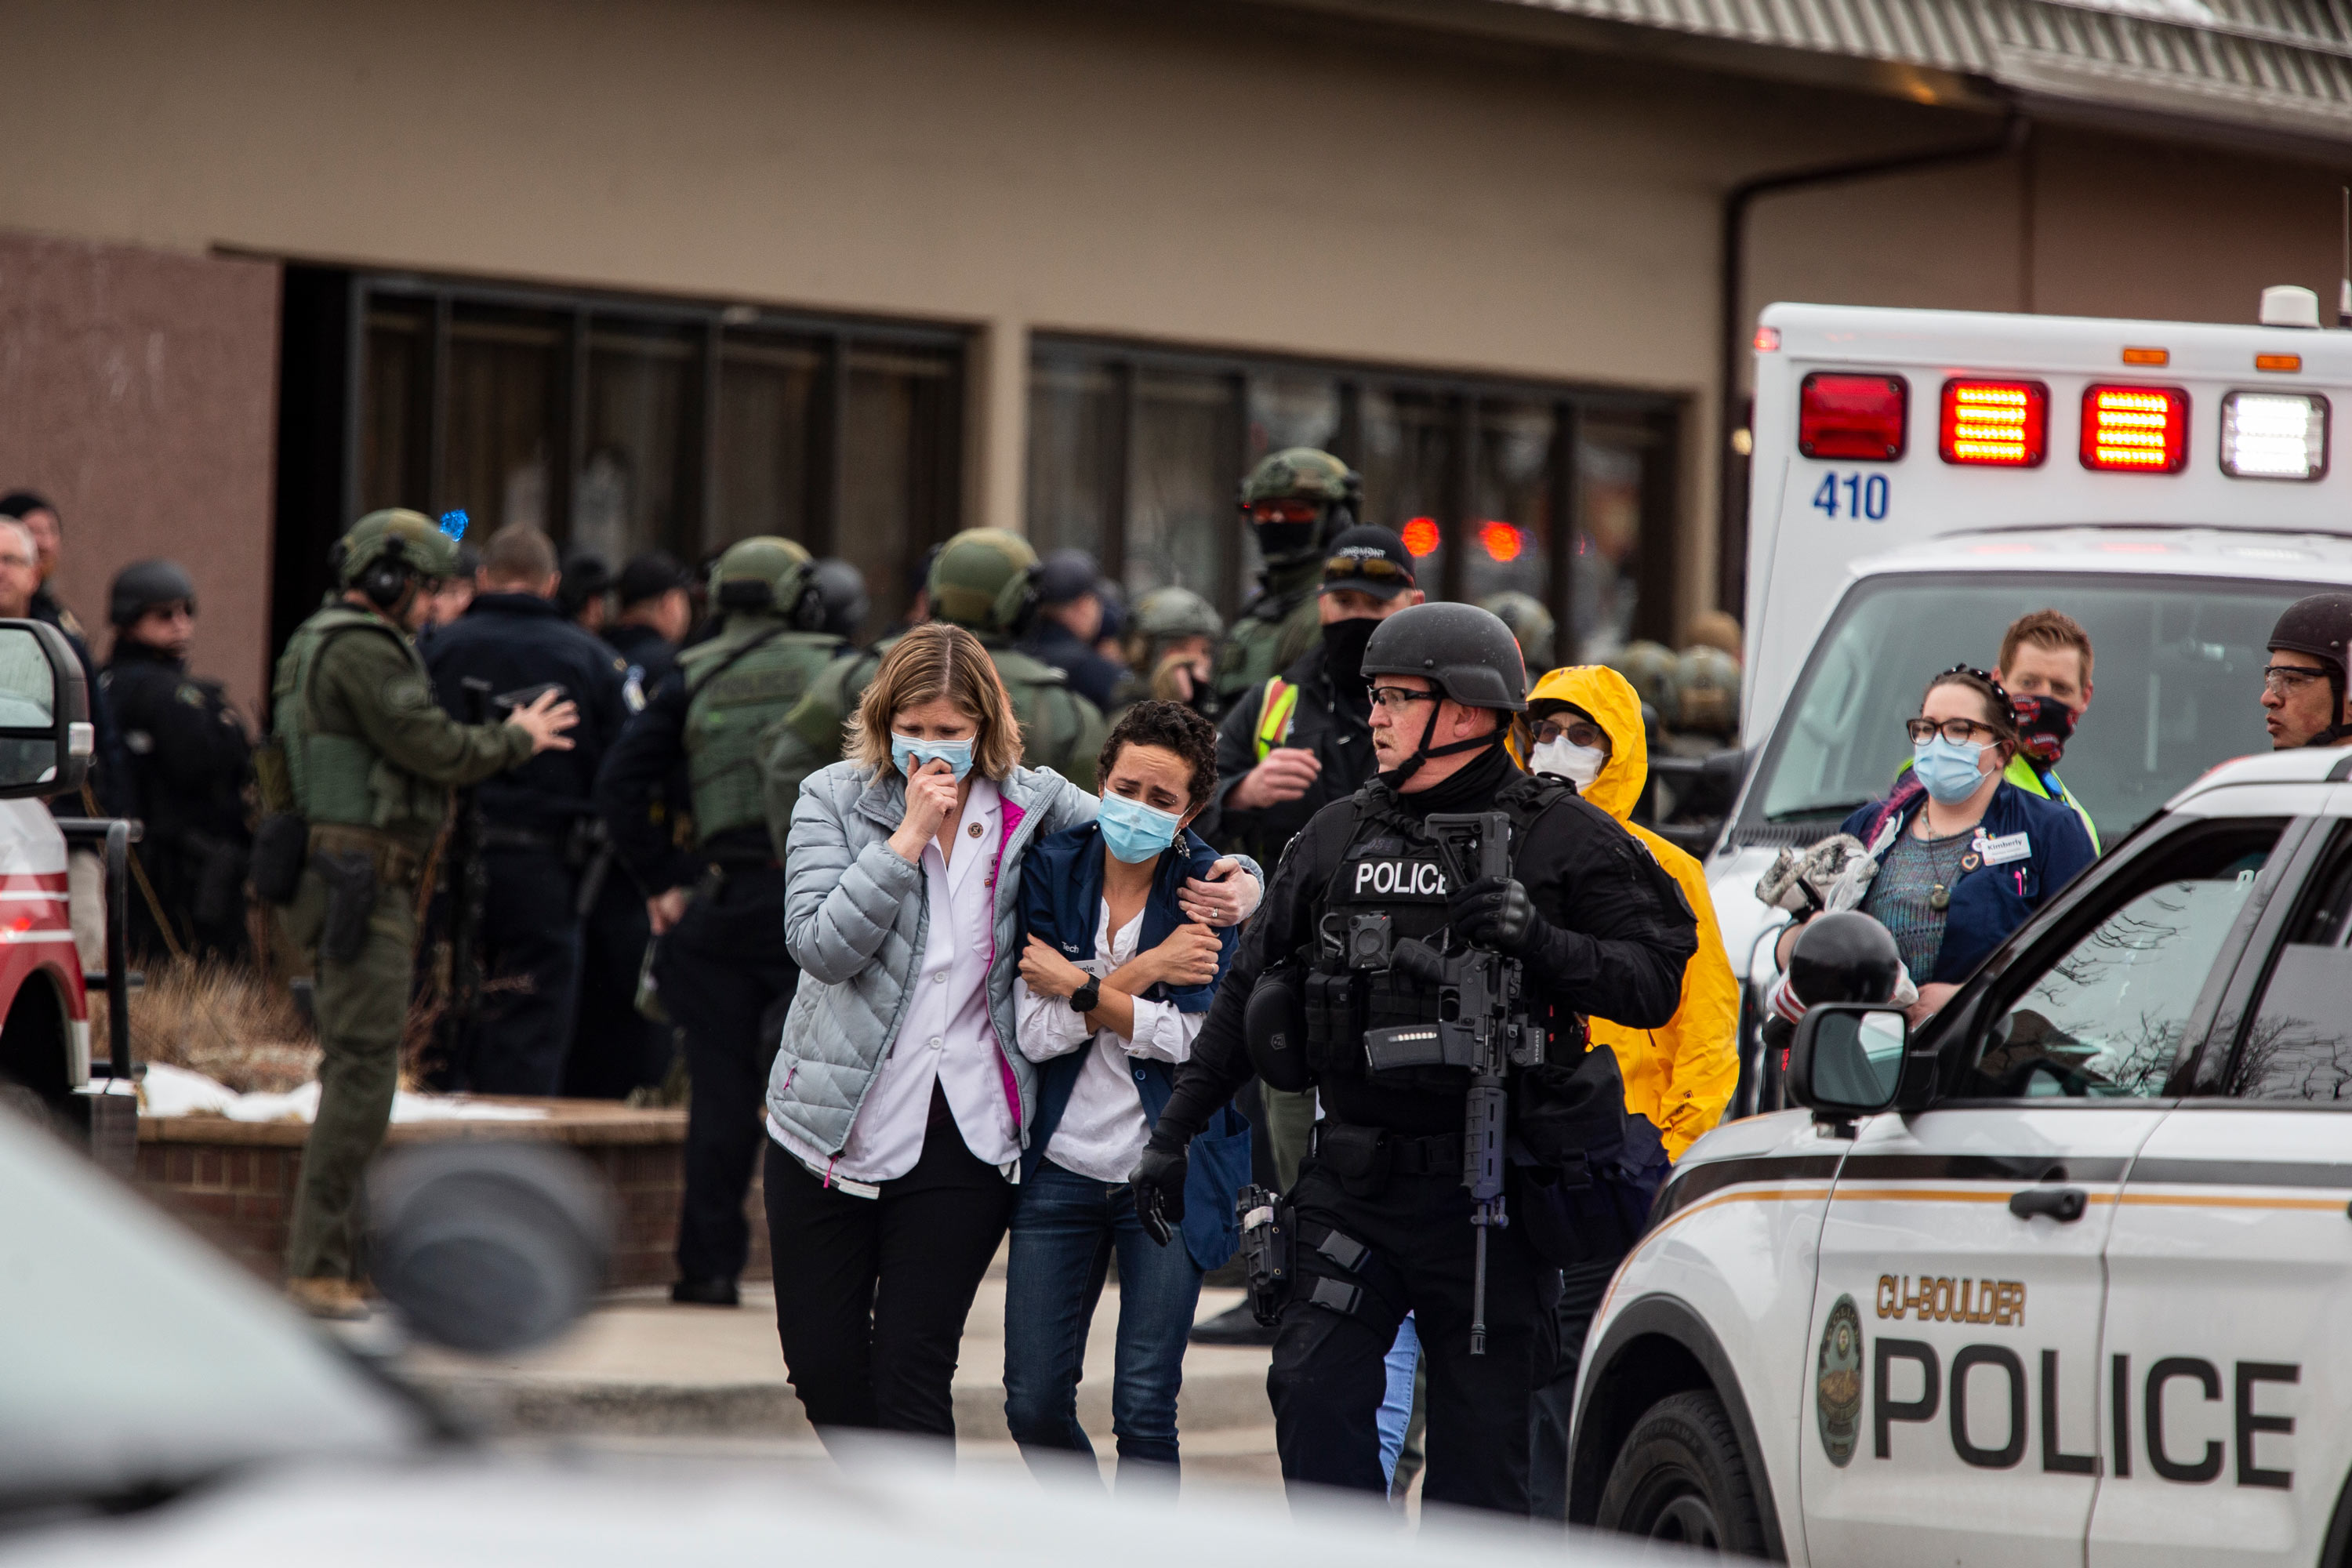 Healthcare workers walk out of a King Sooper's Grocery store after a gunman opened fire on March 22 in Boulder, Colorado. 